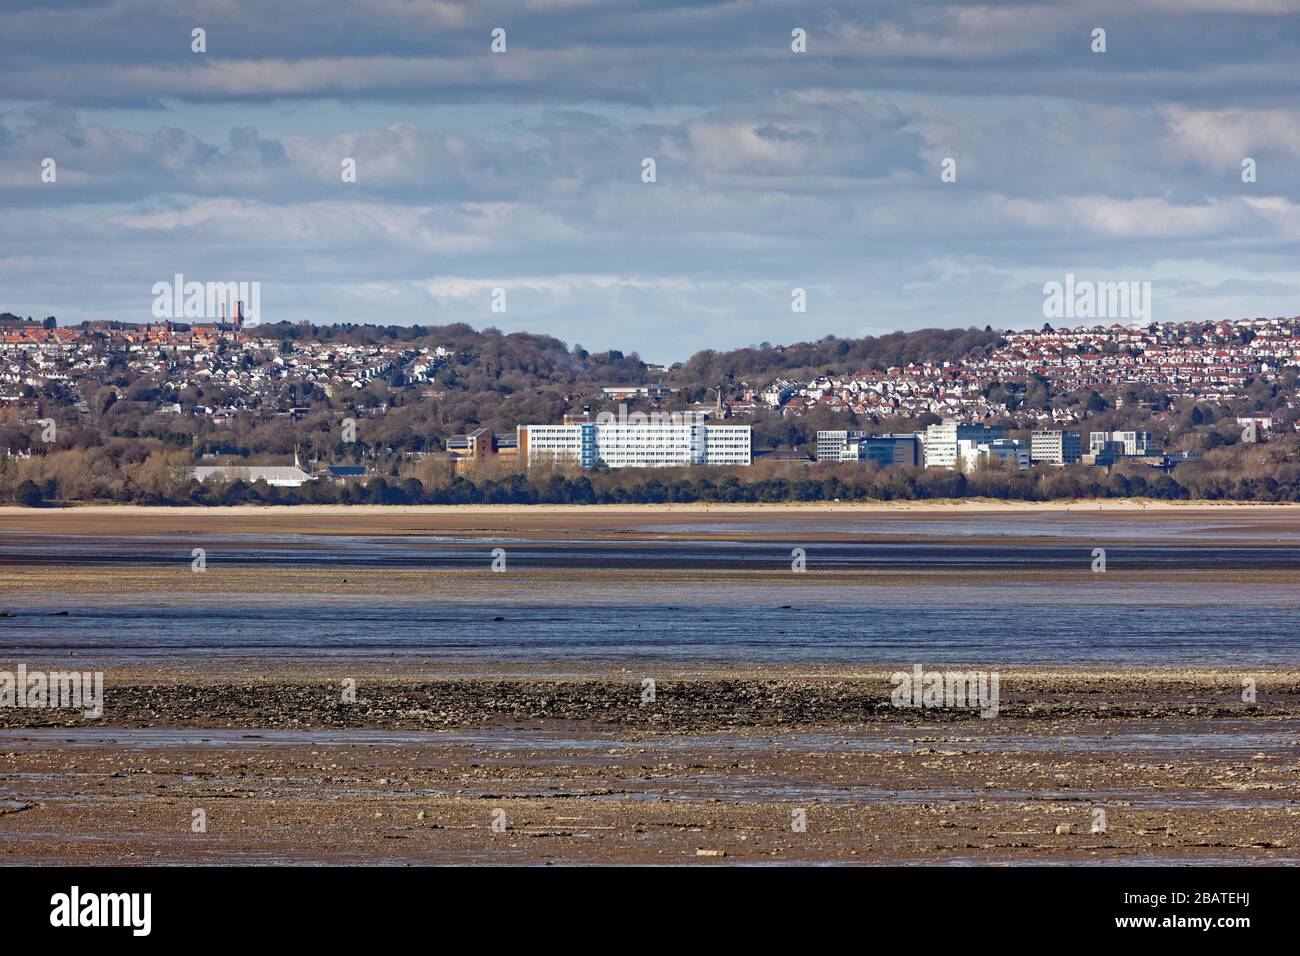 Swansea Bay as seen from the village of Mumbles, Wales, UK. Sunday 29 March 2020 Stock Photo